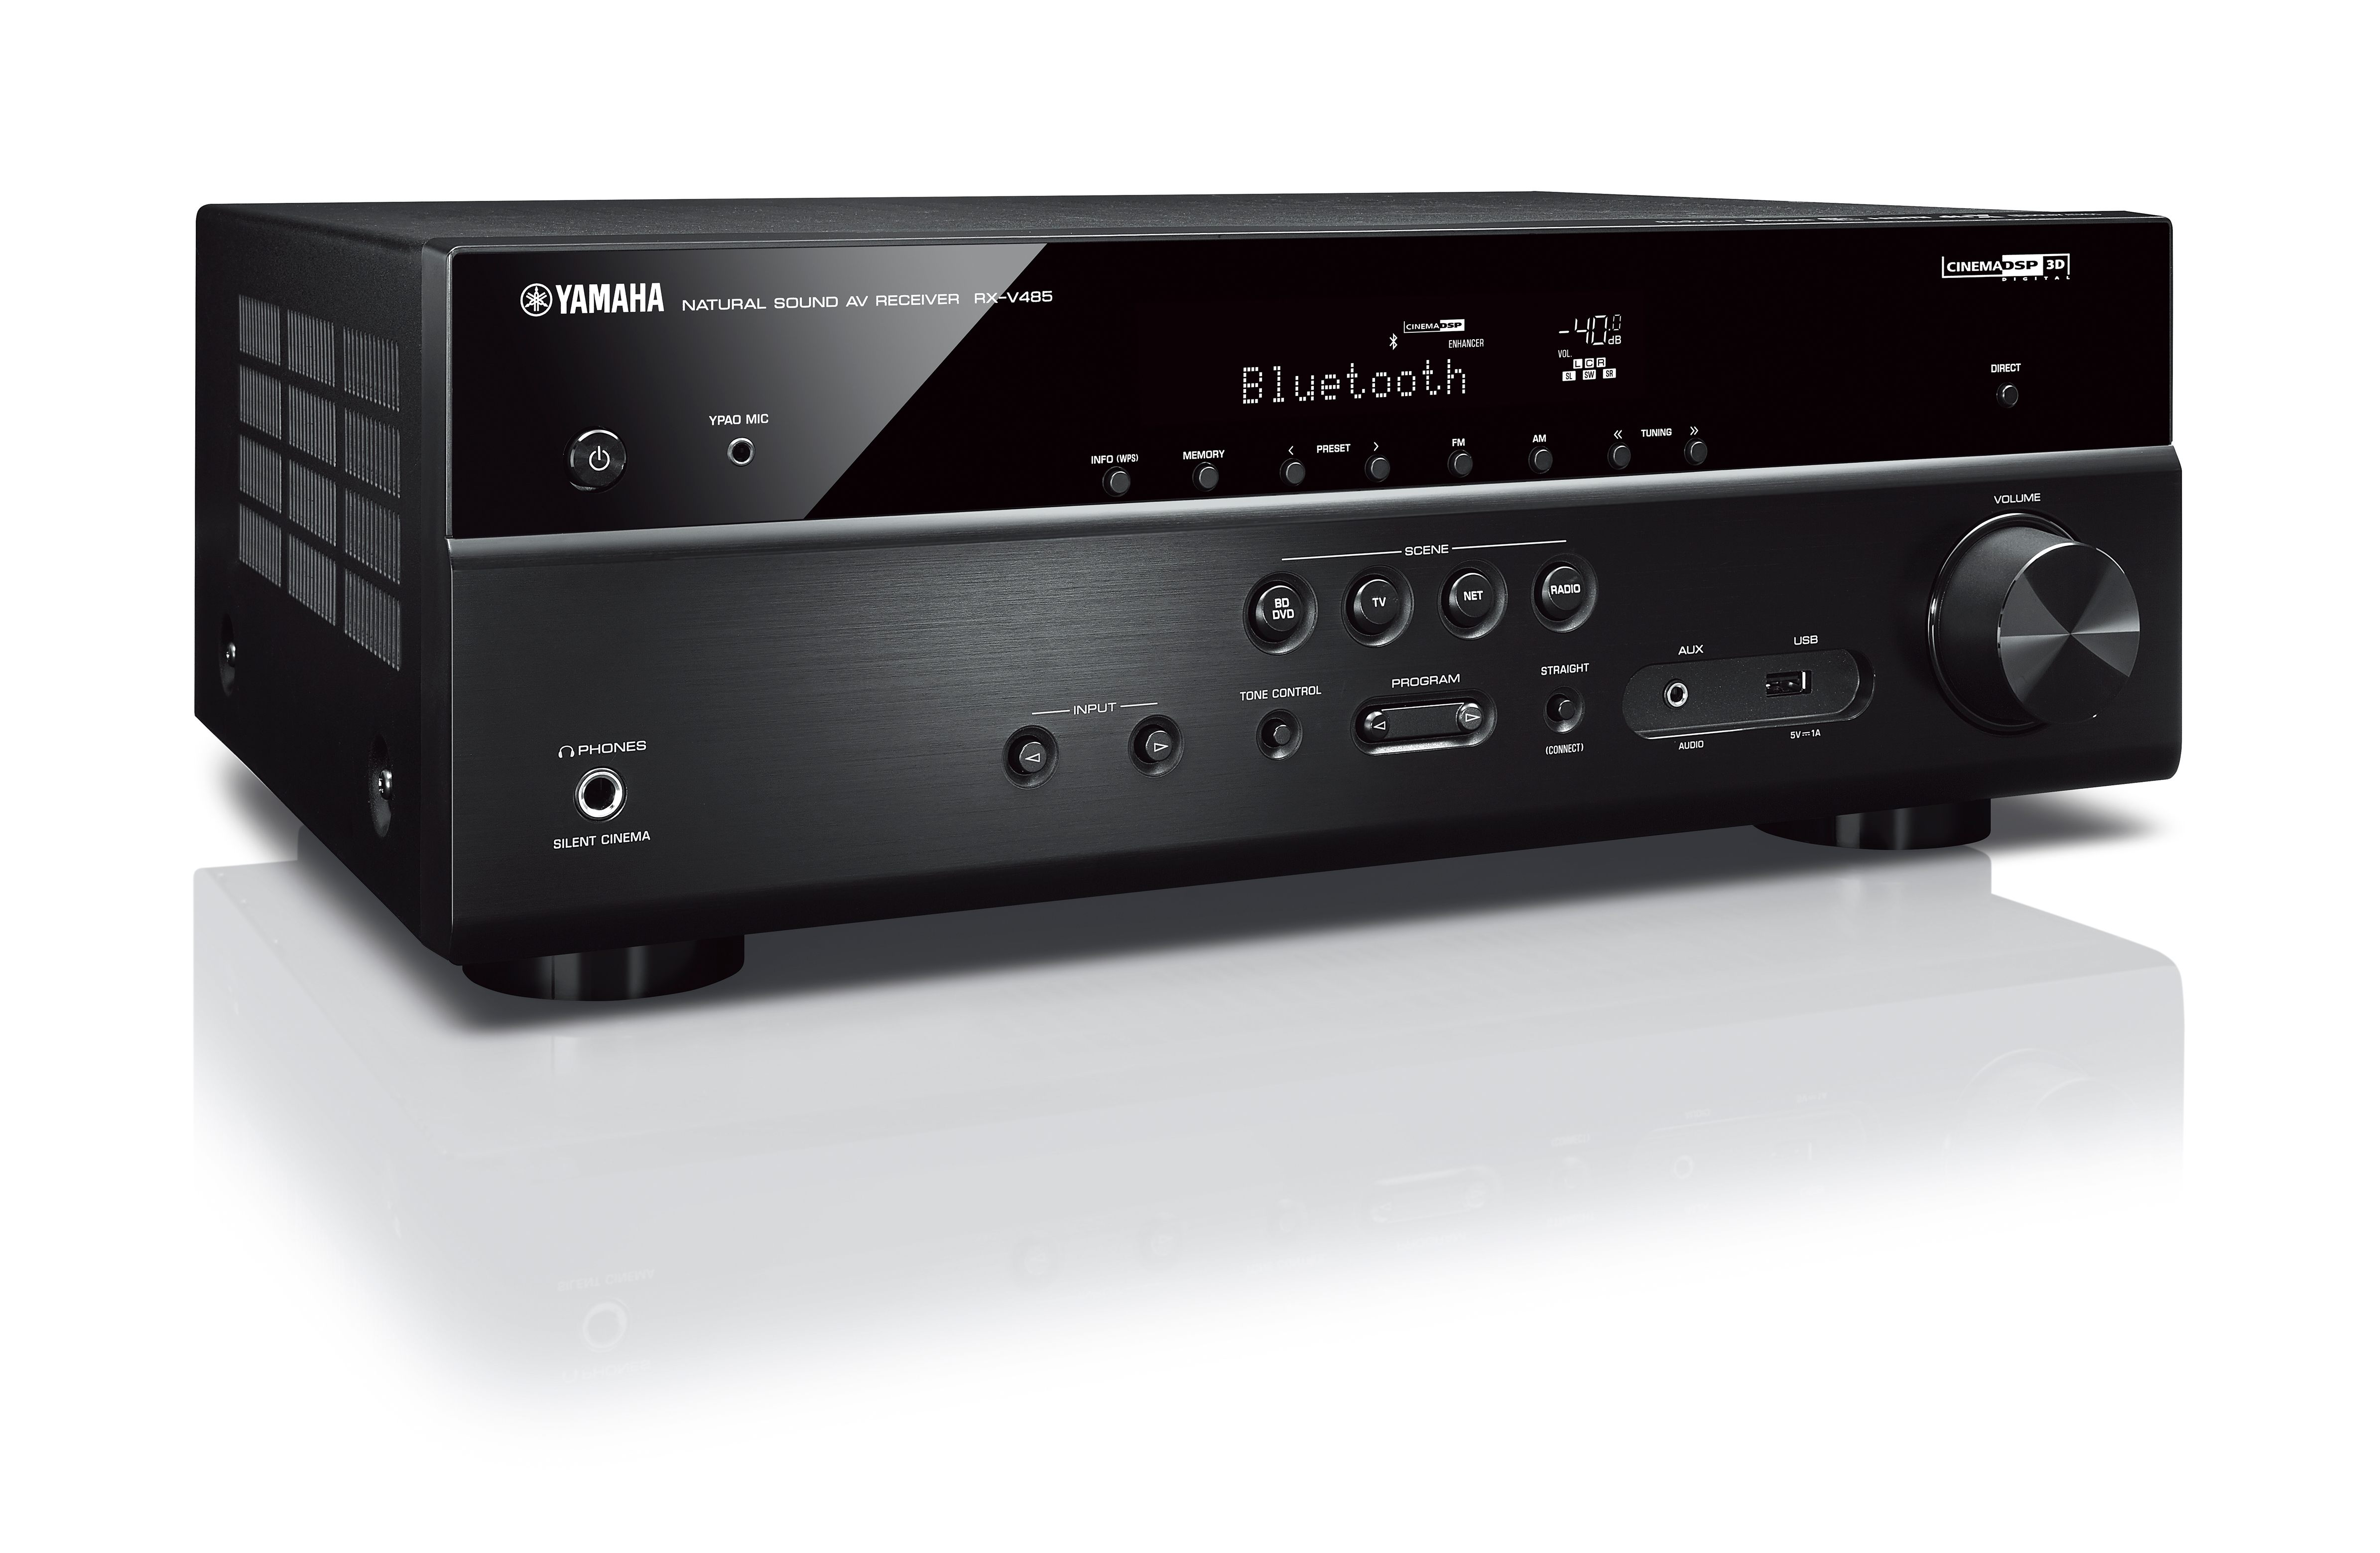 RX-V485 - Overview - AV Receivers - Audio & Visual - Products - Yamaha USA